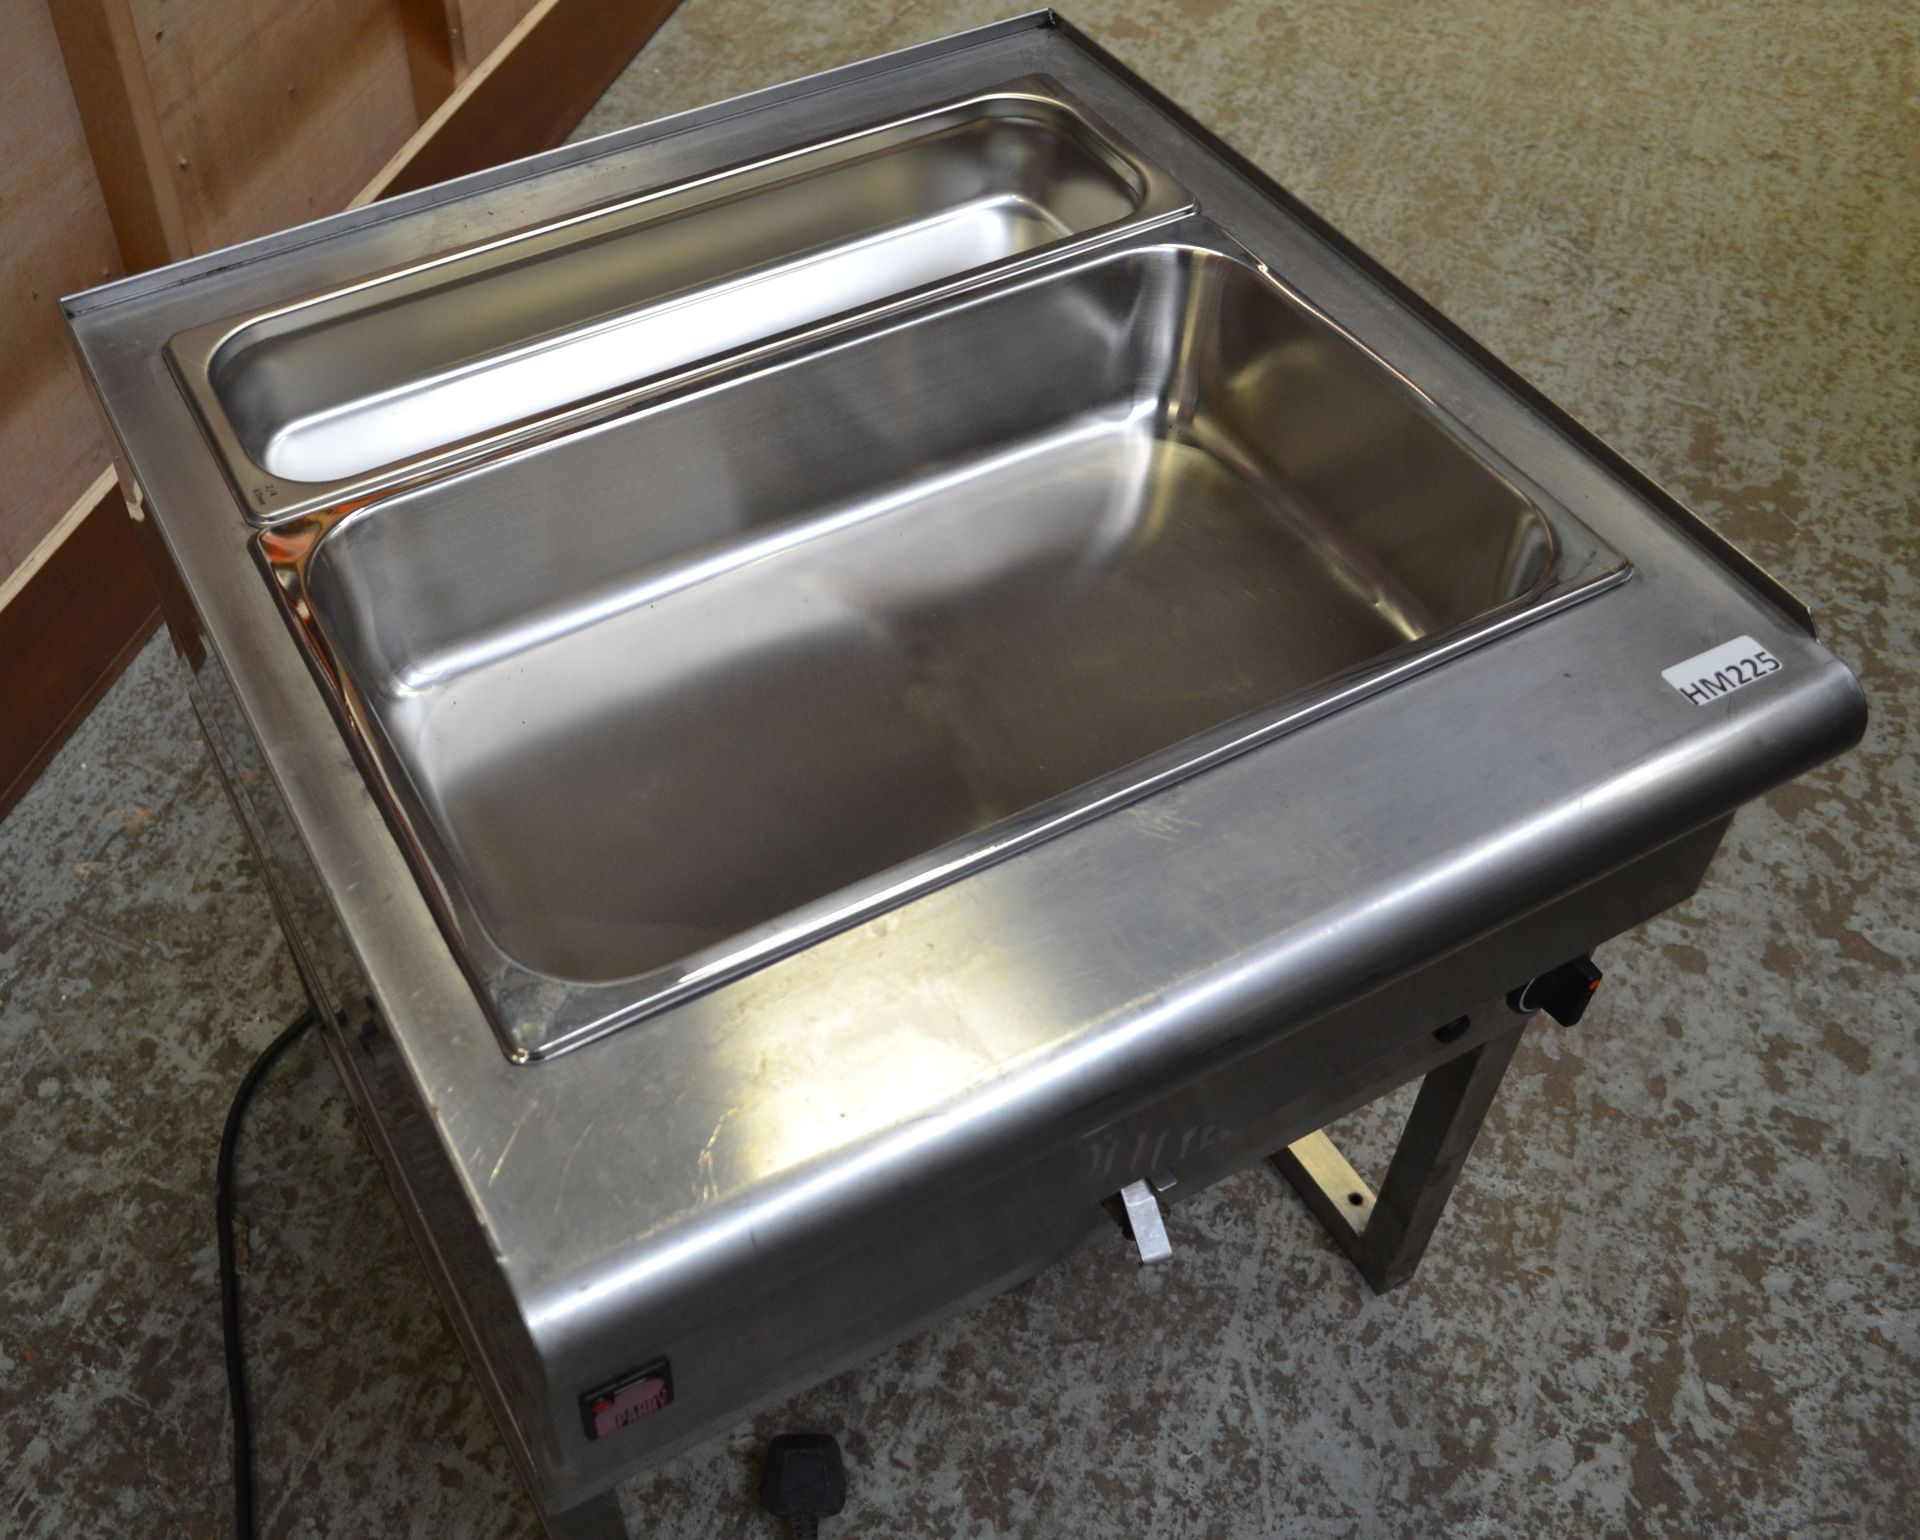 1 x Parry 9146.66W Electric Wet Bain Marie With Stand - 60.5 x 64 x 65.5(h) cm Inc. Stand - Ref: - Image 3 of 10